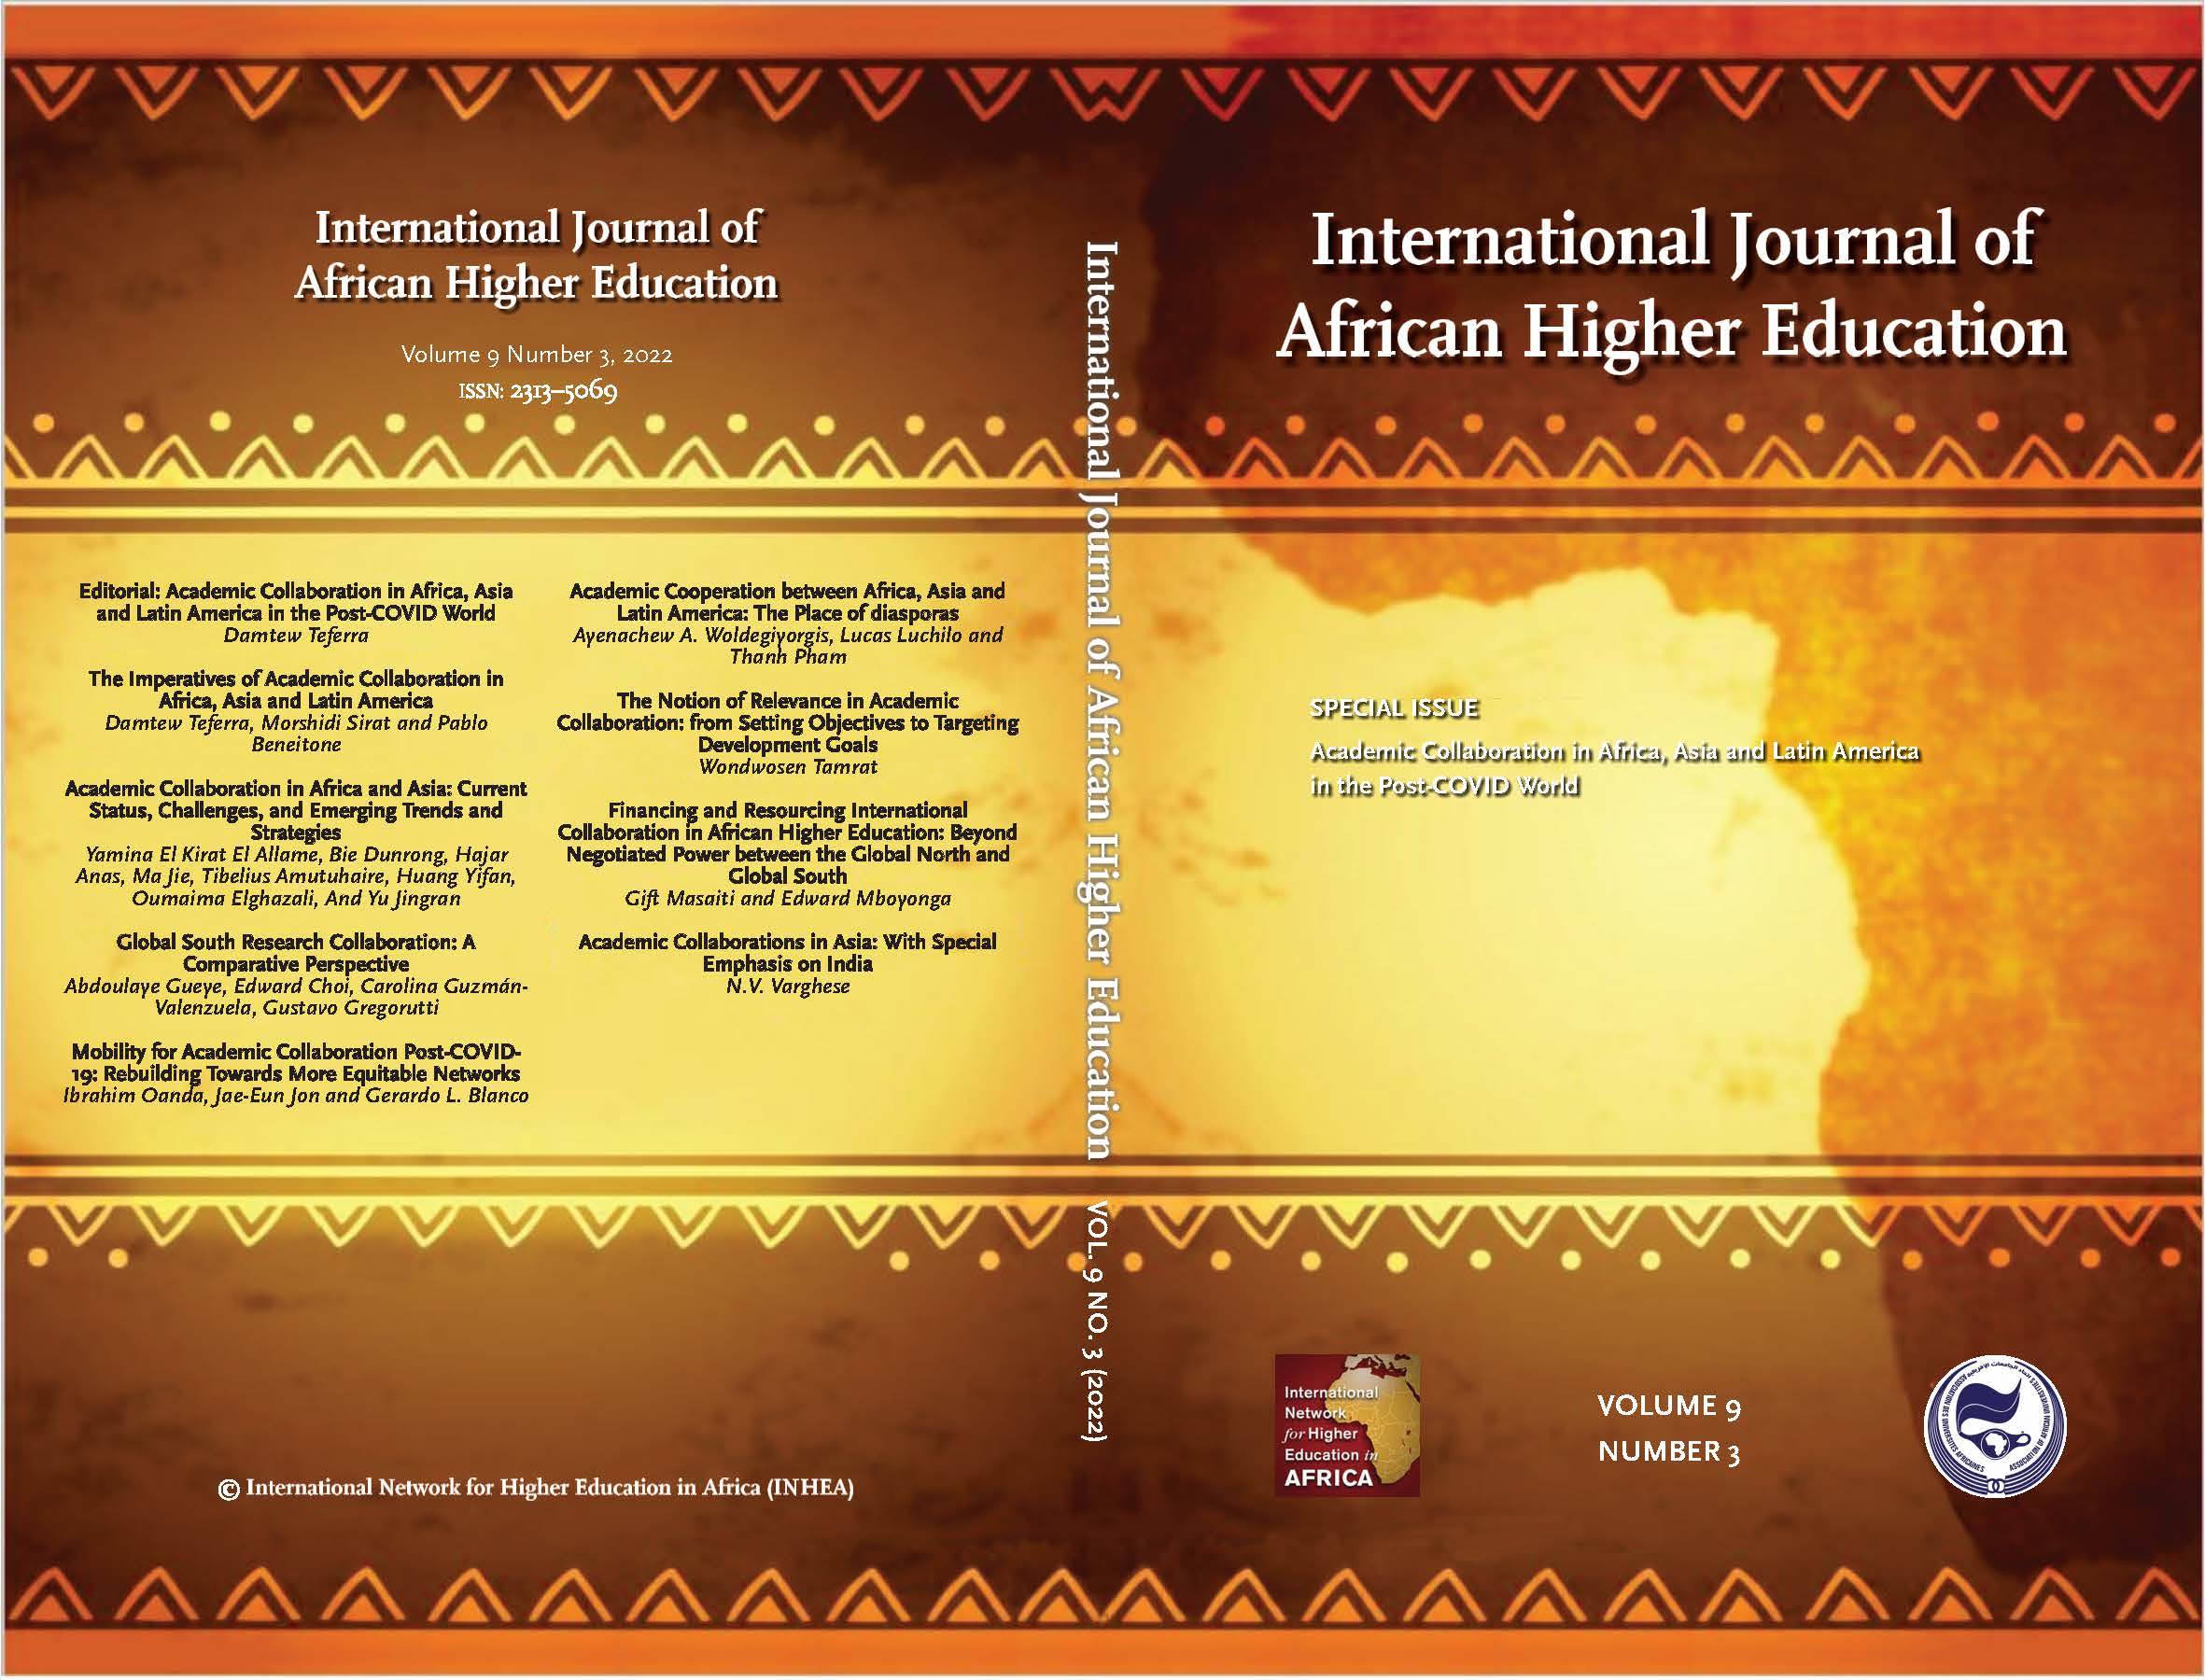 					View Vol. 9 No. 3 (2022): IJAHE Special Issue: Academic Collaboration in Africa, Asia and Latin America in the Post-COVID World
				